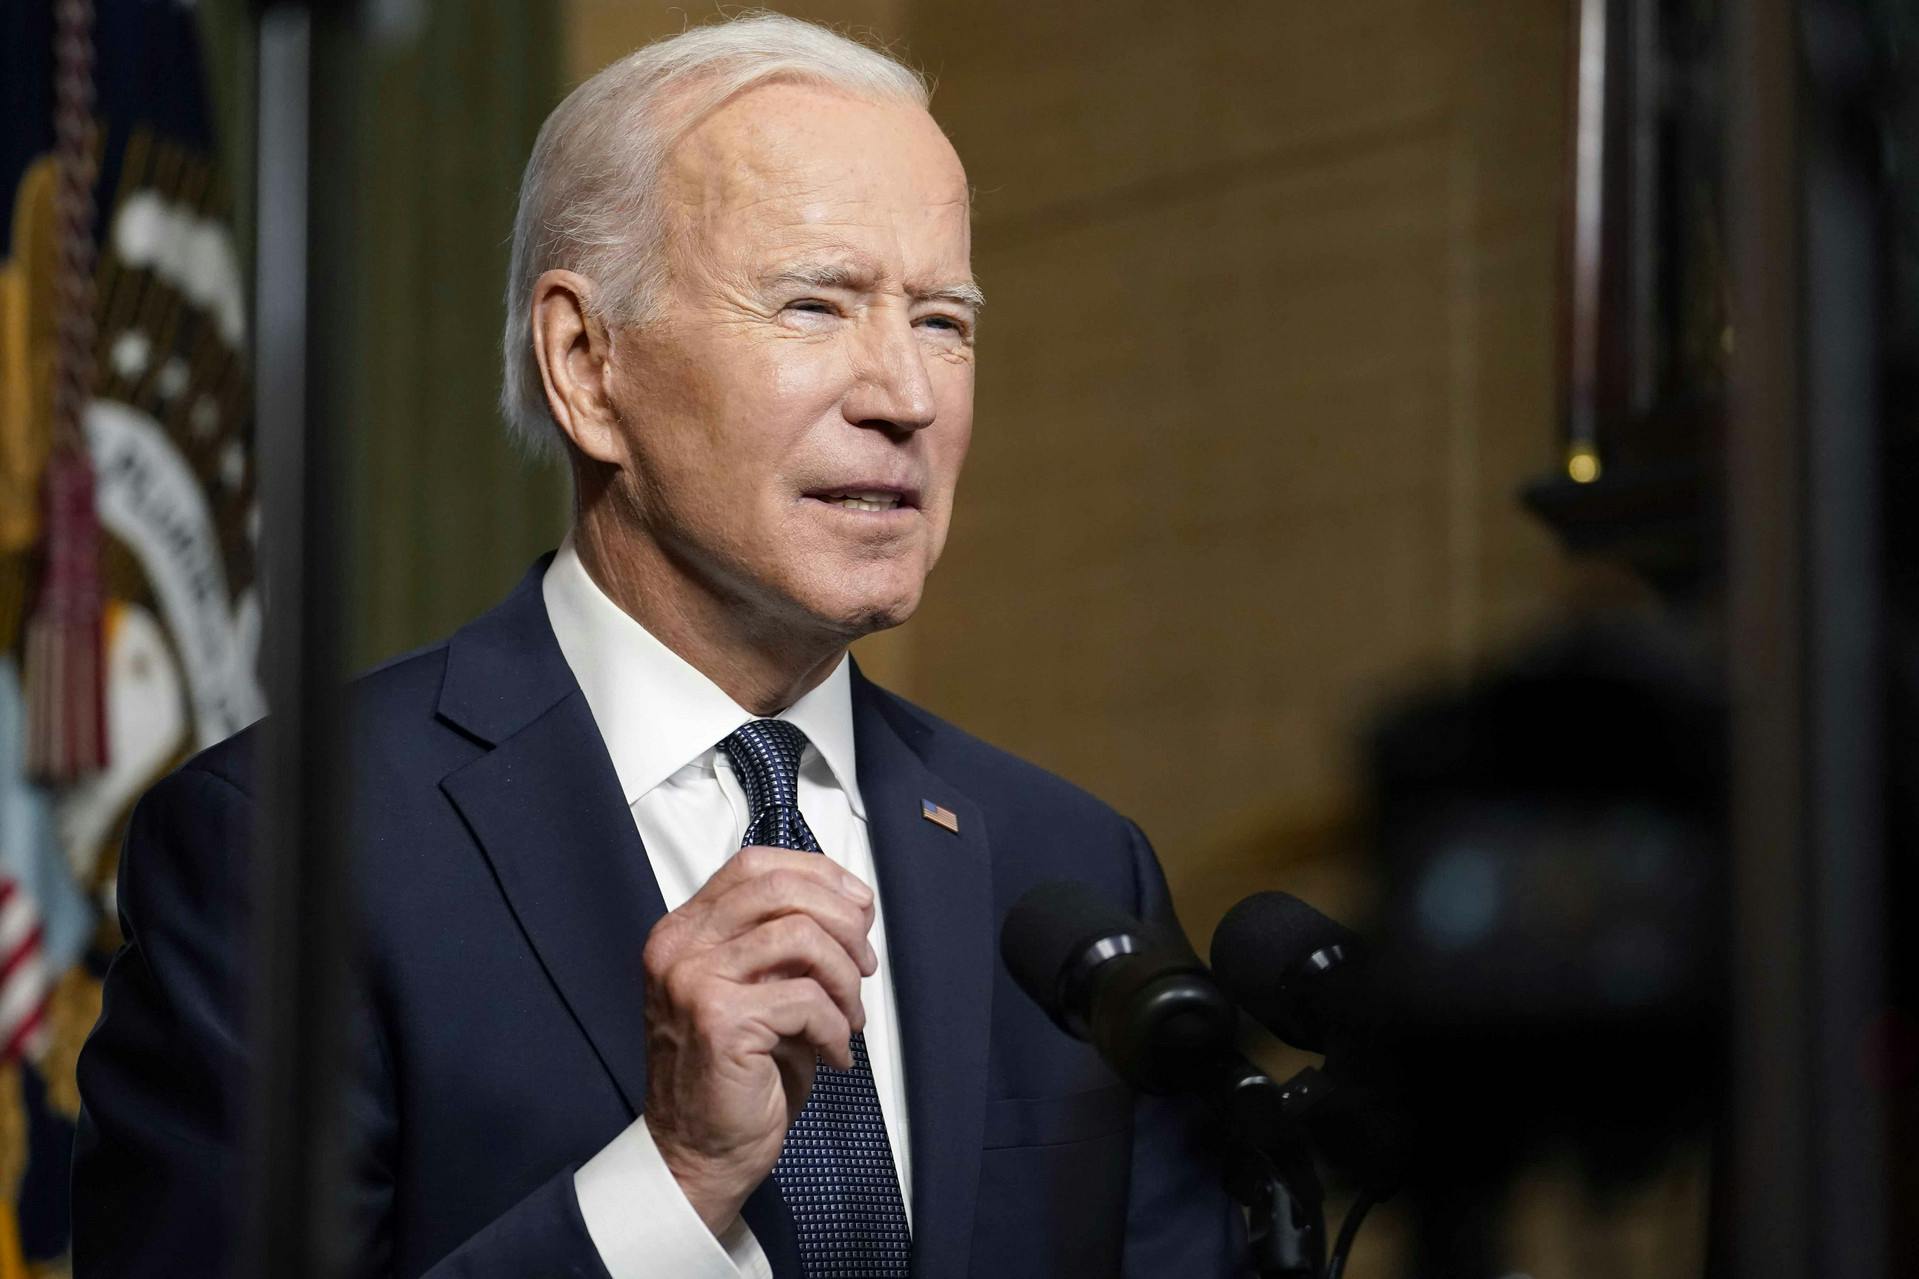 
The Biden administration is assembling the plan ahead of a major international climate summit the president plans to host April 22-23. 